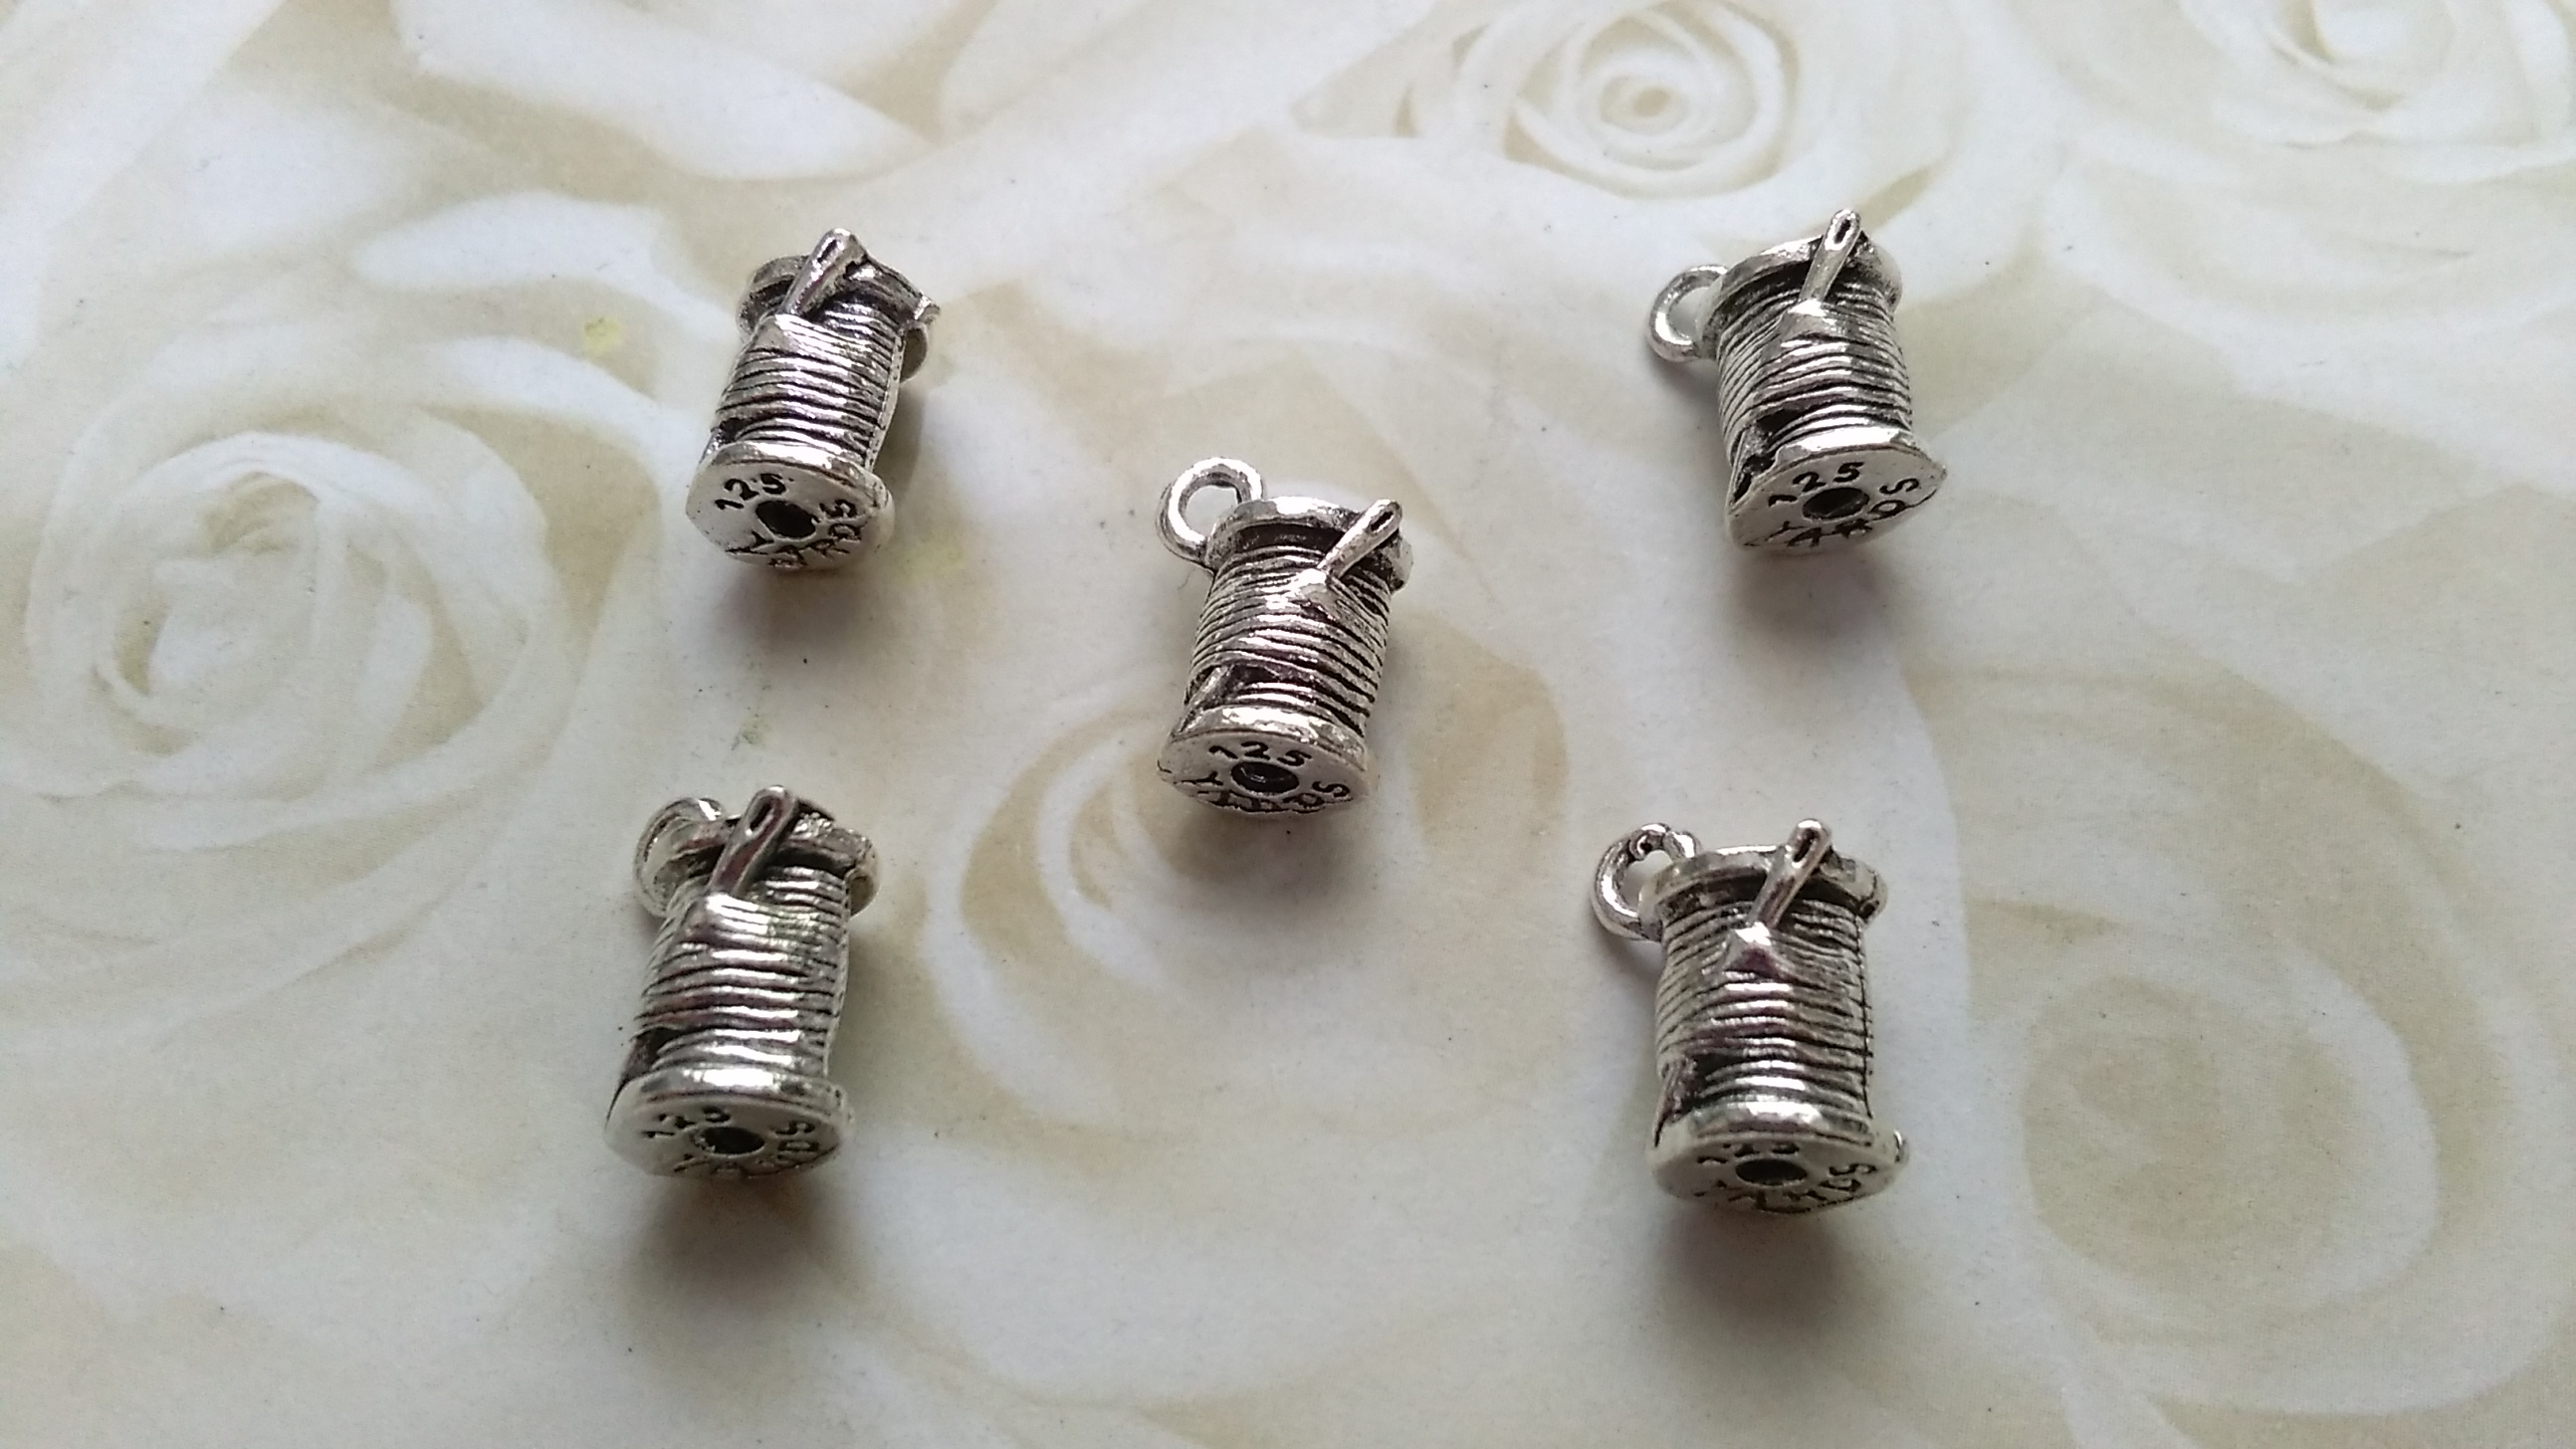 Tibetan Silver Solid Needle and Thread 10mm Charms